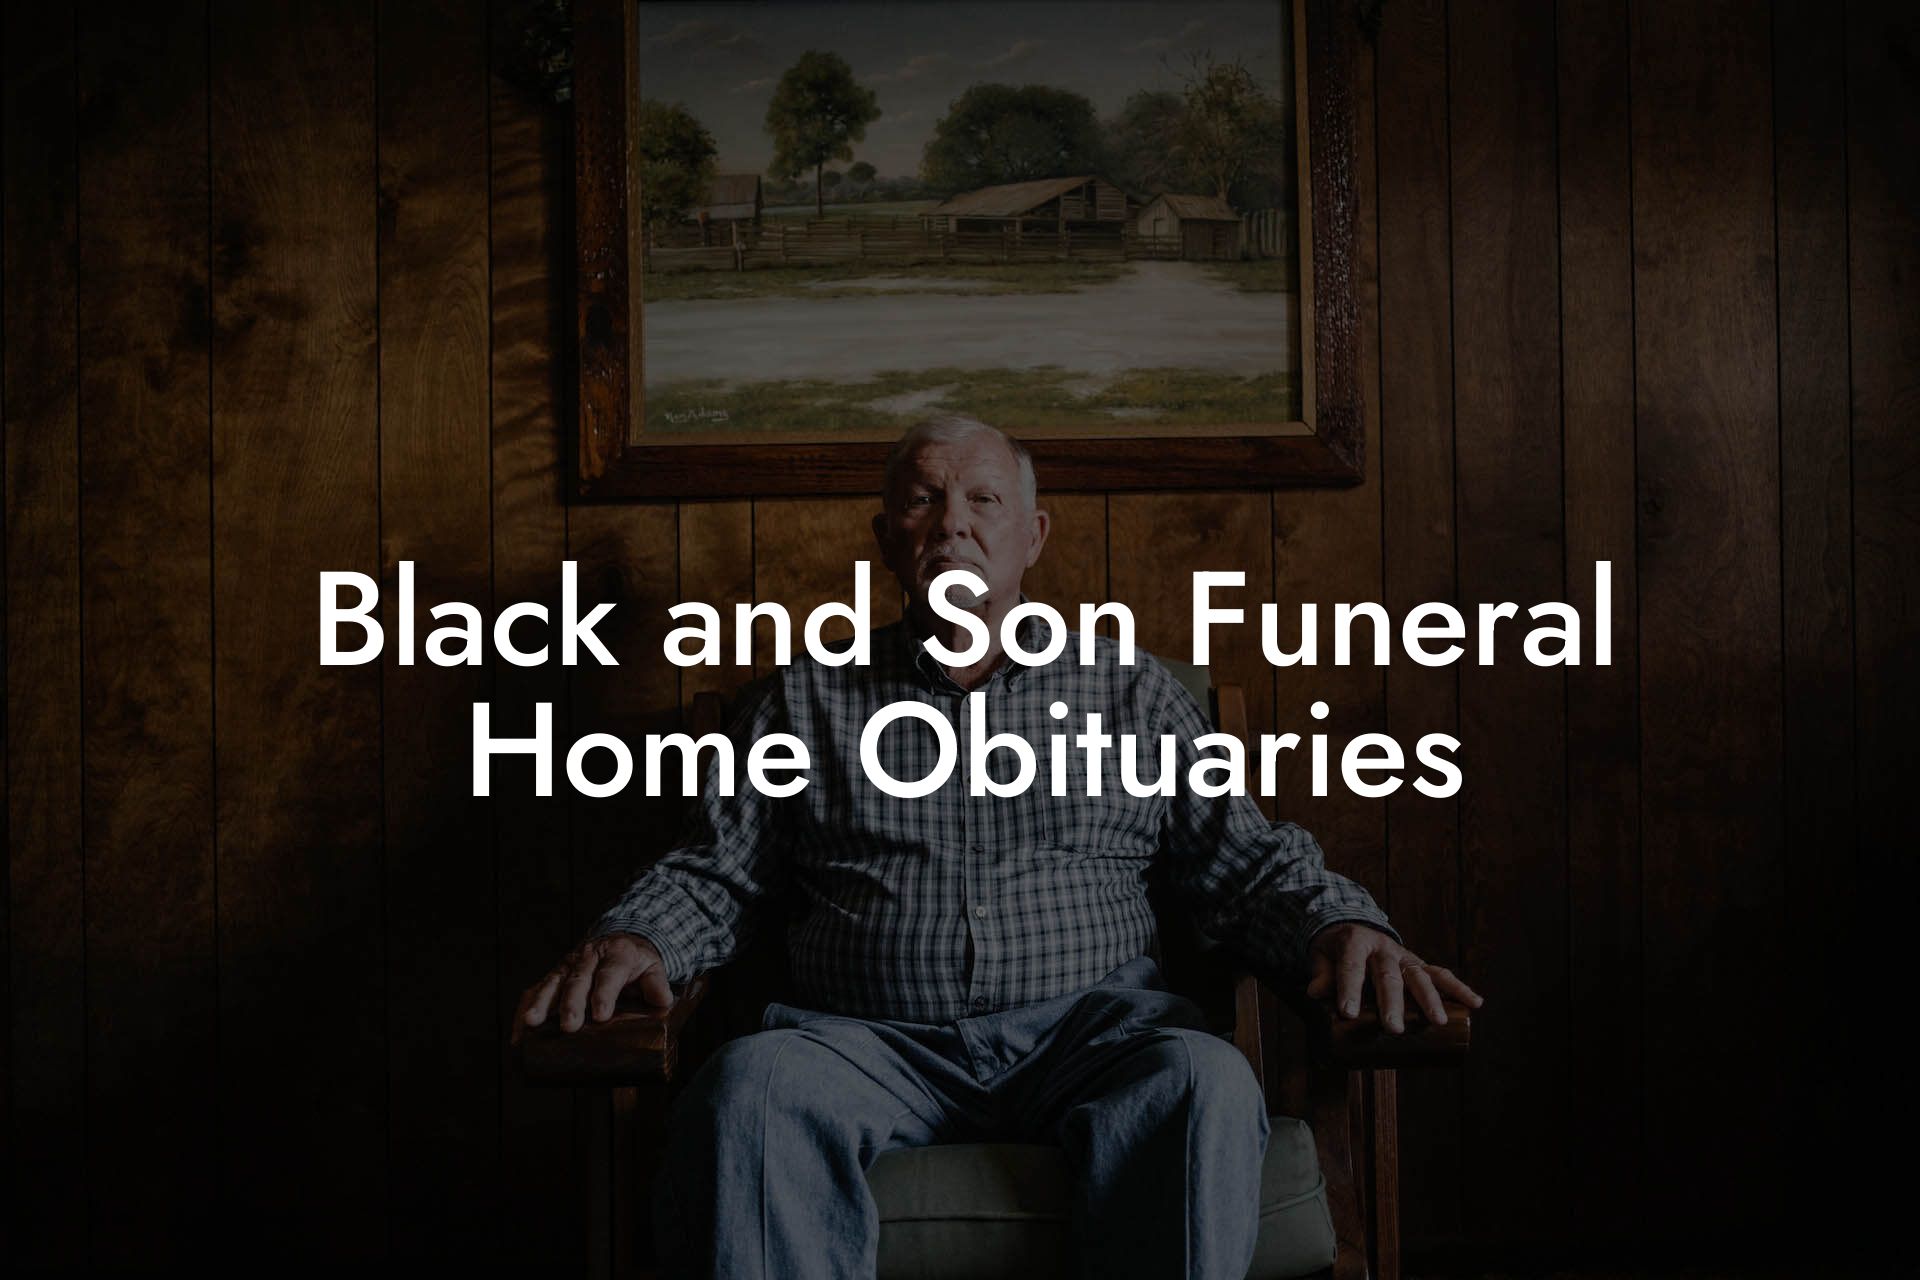 Black and Son Funeral Home Obituaries